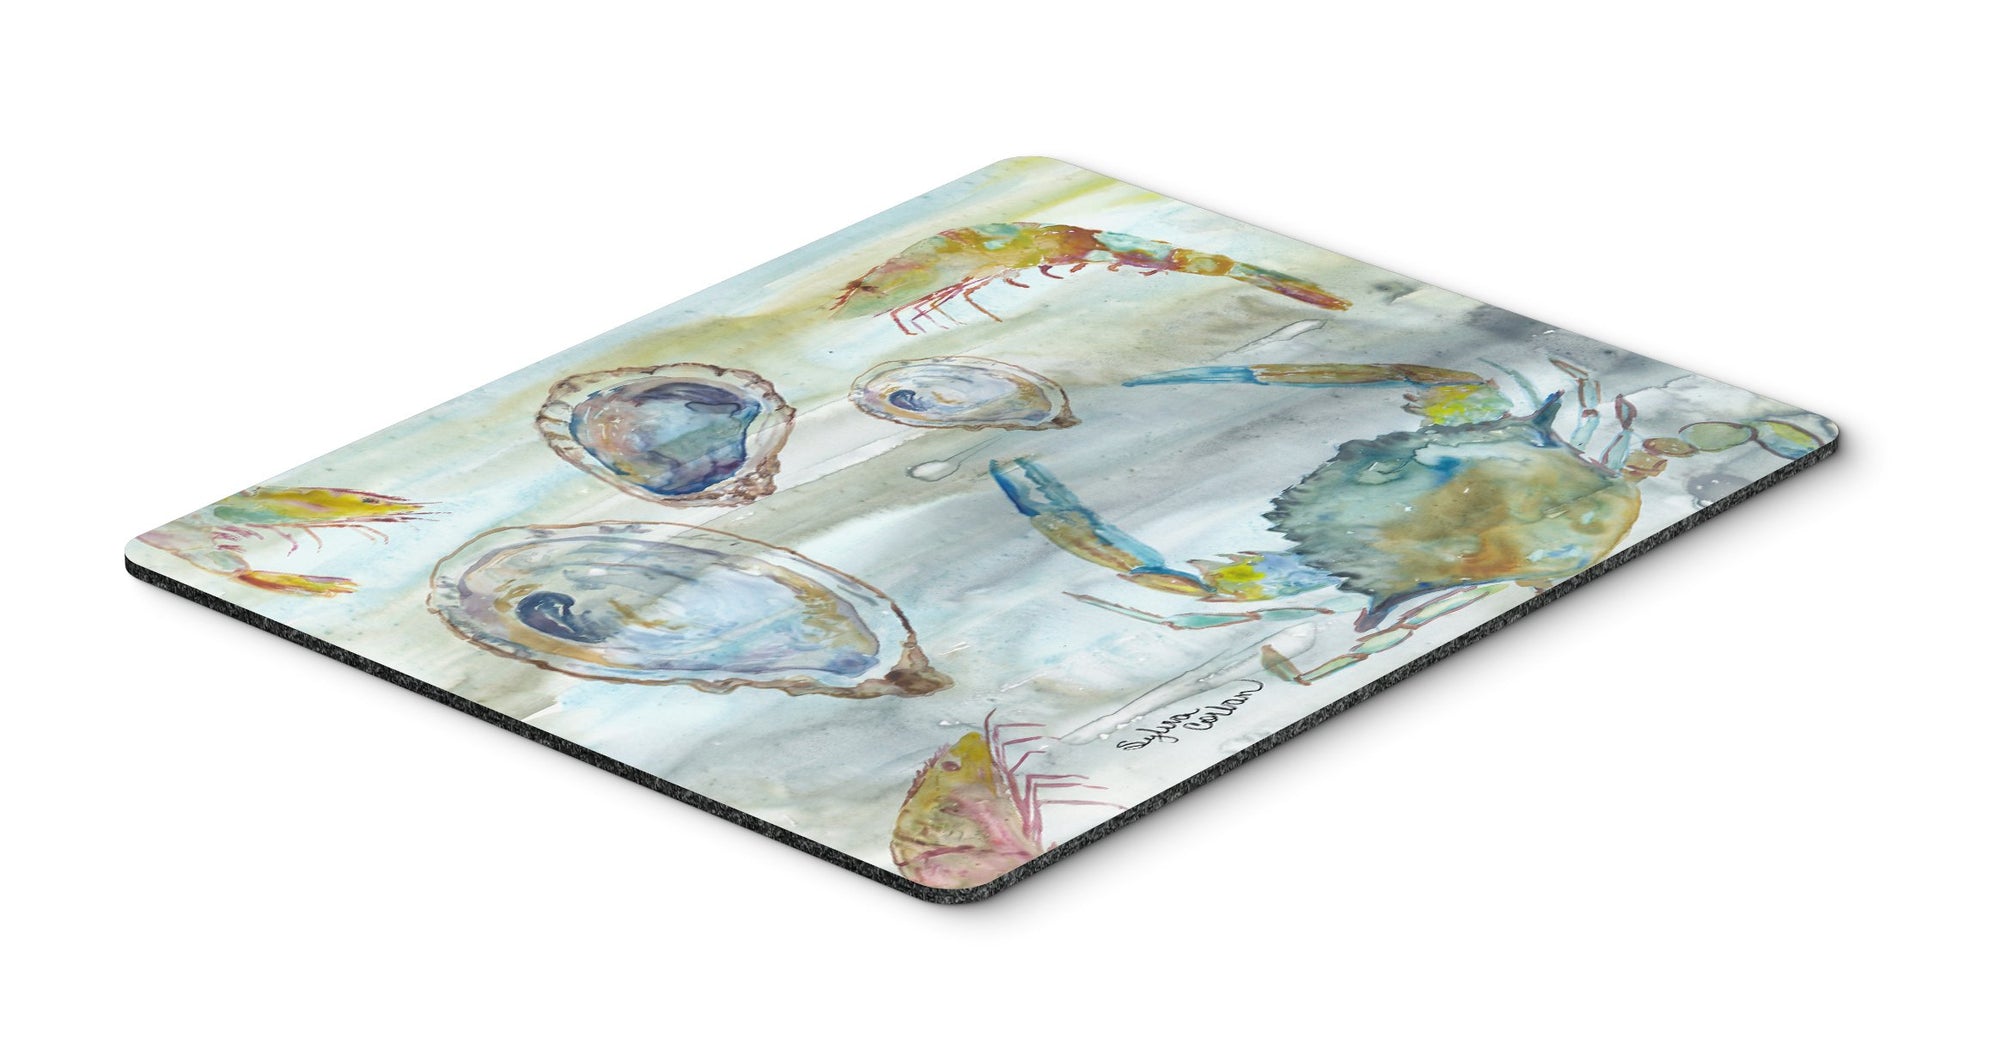 Crab, Shrimp and Oyster Watercolor Mouse Pad, Hot Pad or Trivet SC2010MP by Caroline's Treasures